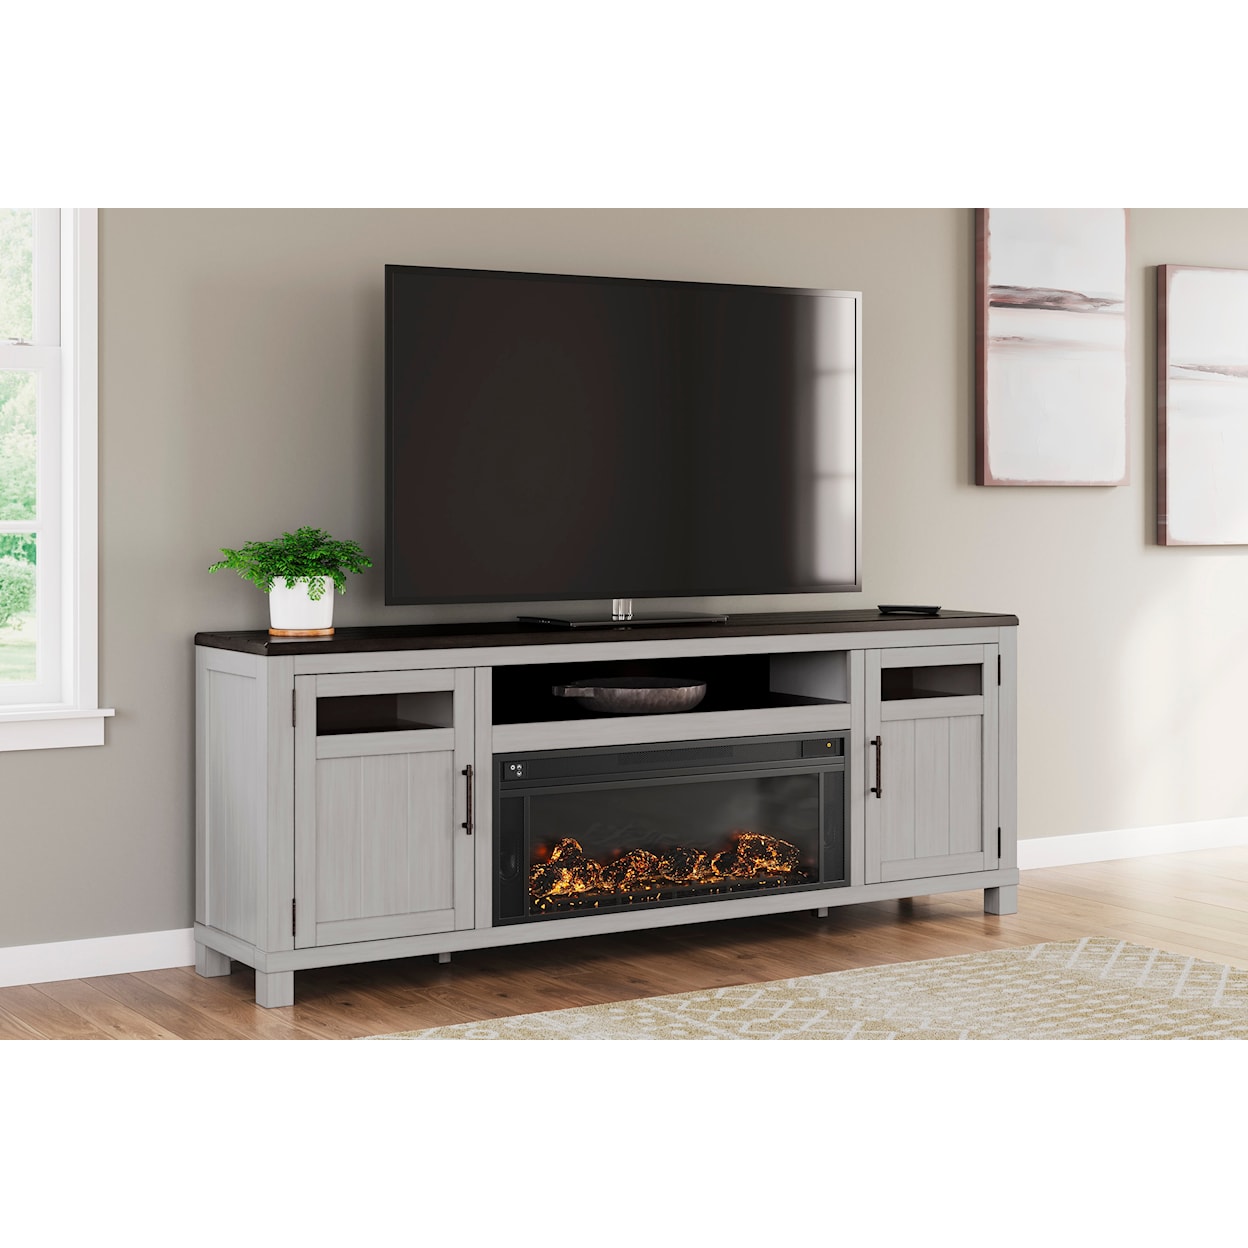 Benchcraft Darborn 88" TV Stand with Electric Fireplace